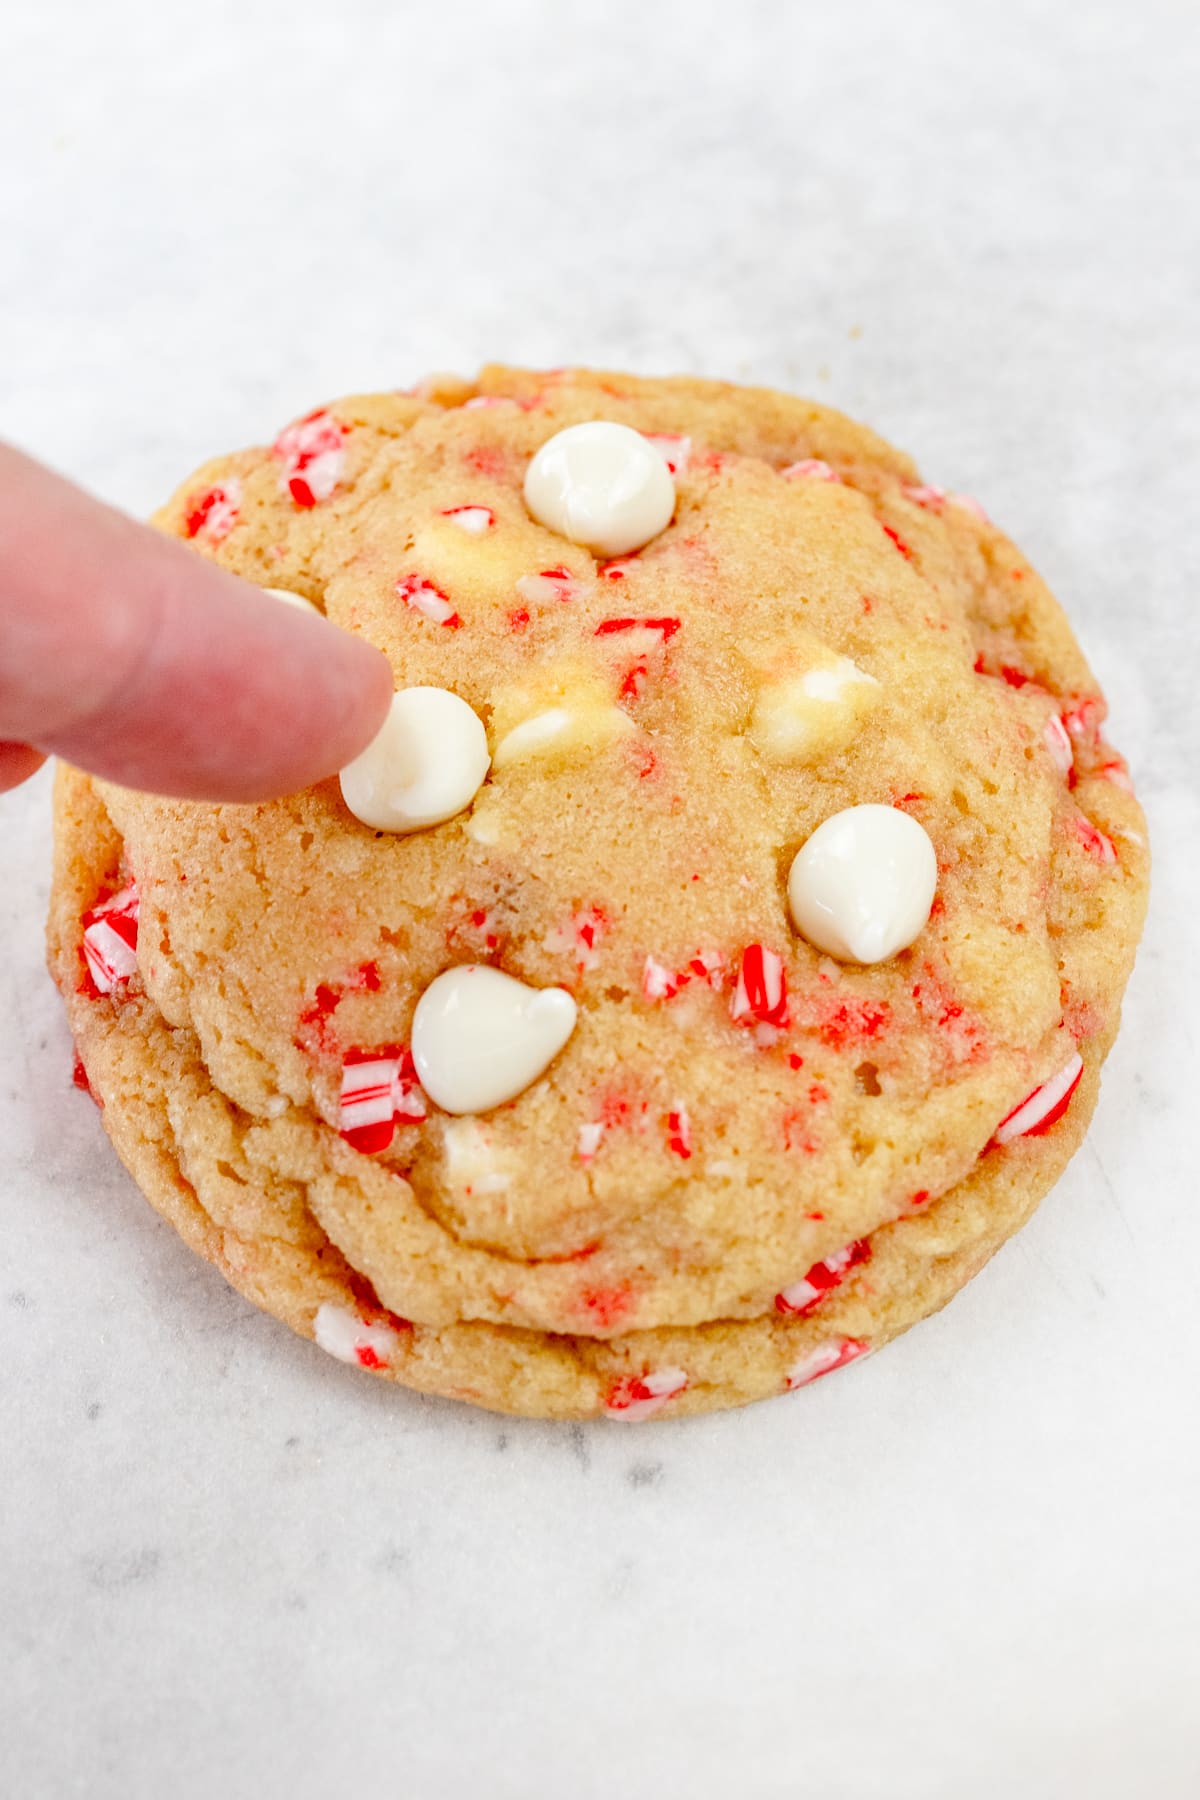 Top view of a freshly baked White Chocolate Peppermint Cookie with fingers pressing more white chocolate chips into the top.